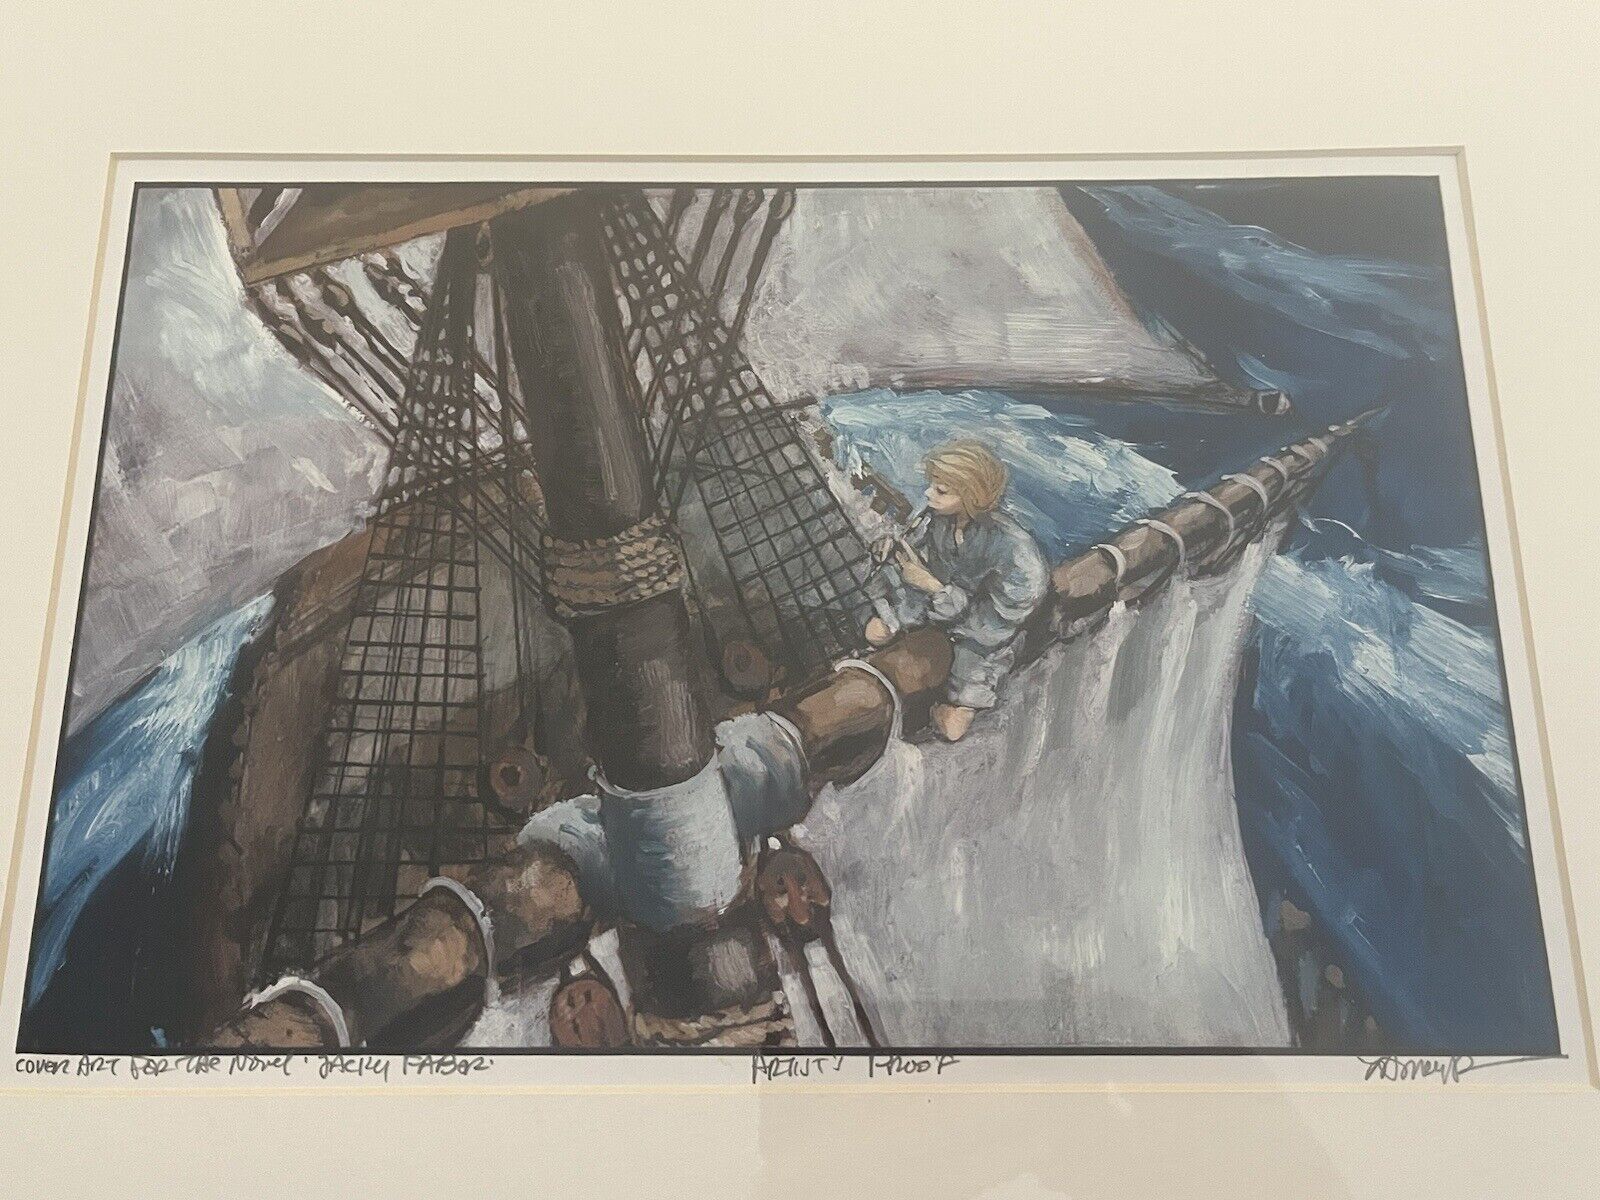 Rare Jack Jacky Faber Pirate Artist Proof Book Cover Art Signed by Meyer